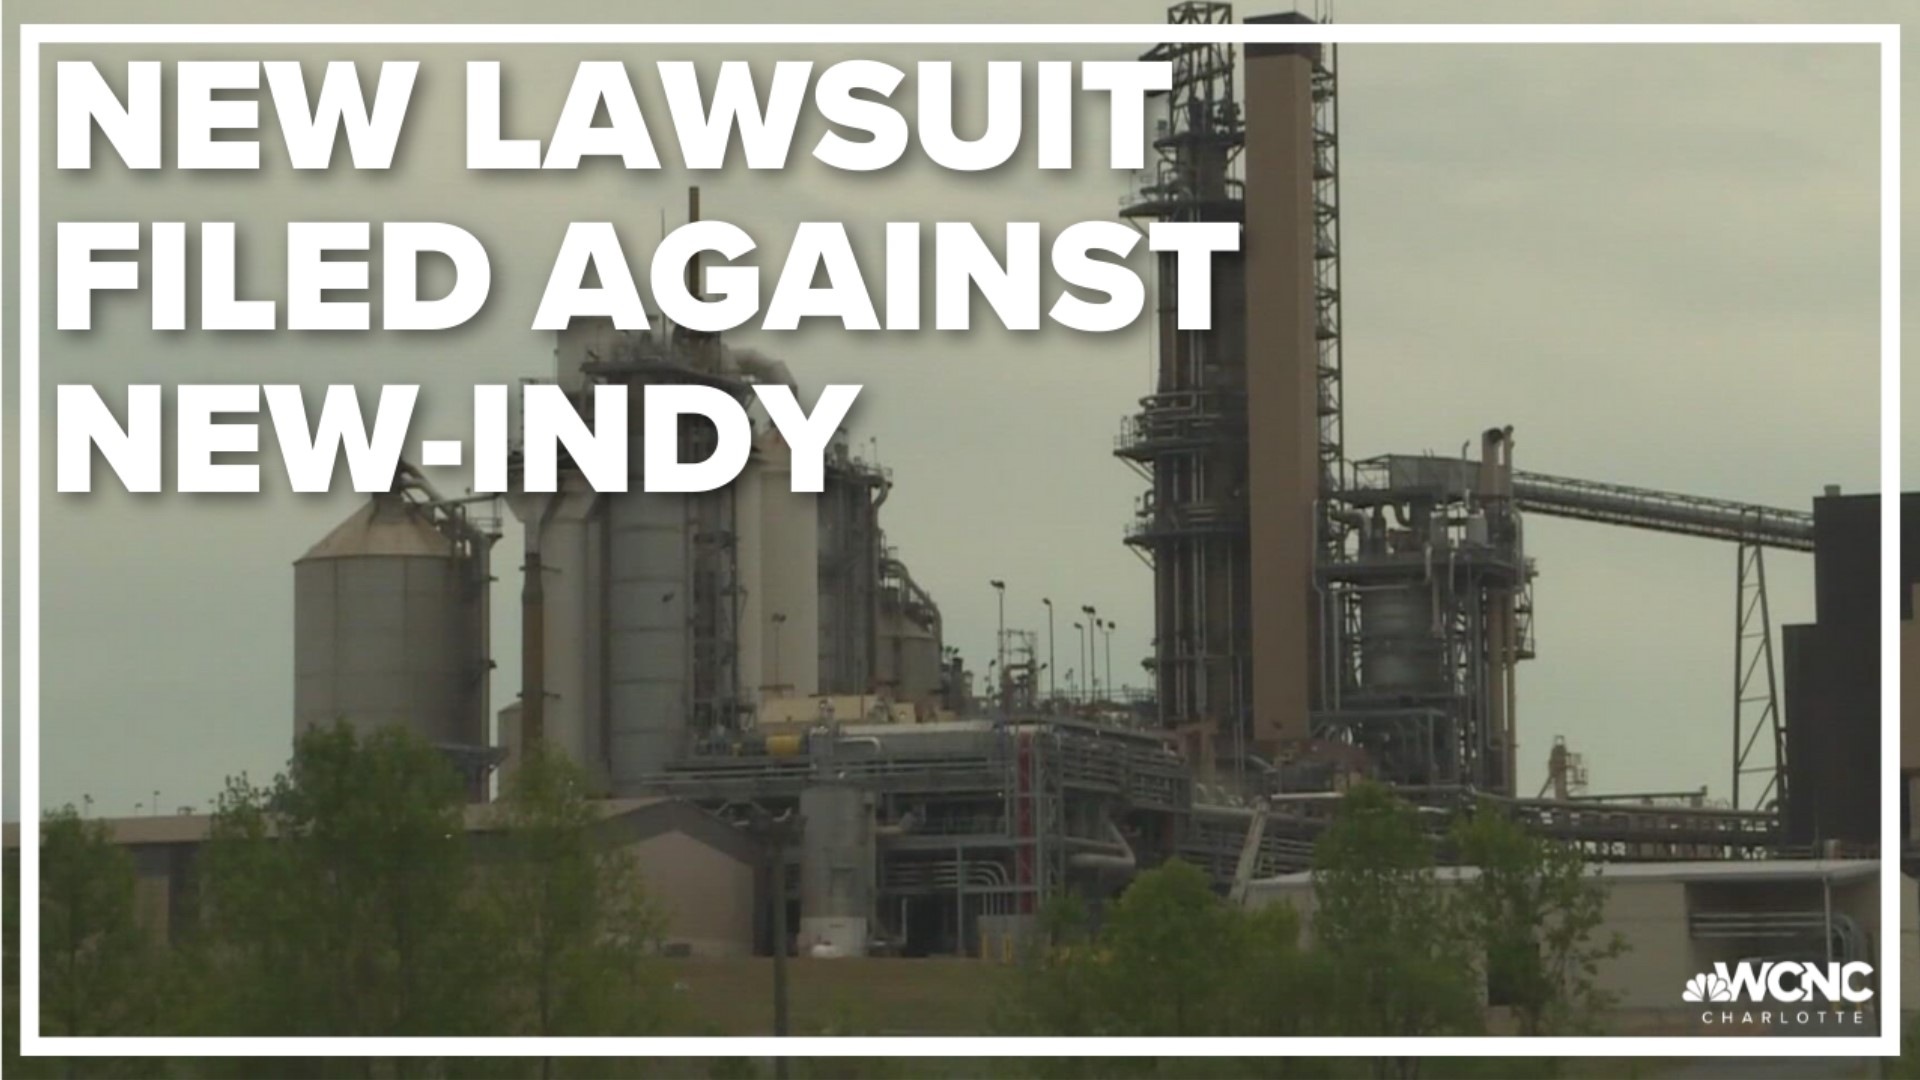 According to a 60-day notice of intent, New-Indy violated the emission limits imposed by the EPA in an emergency order.